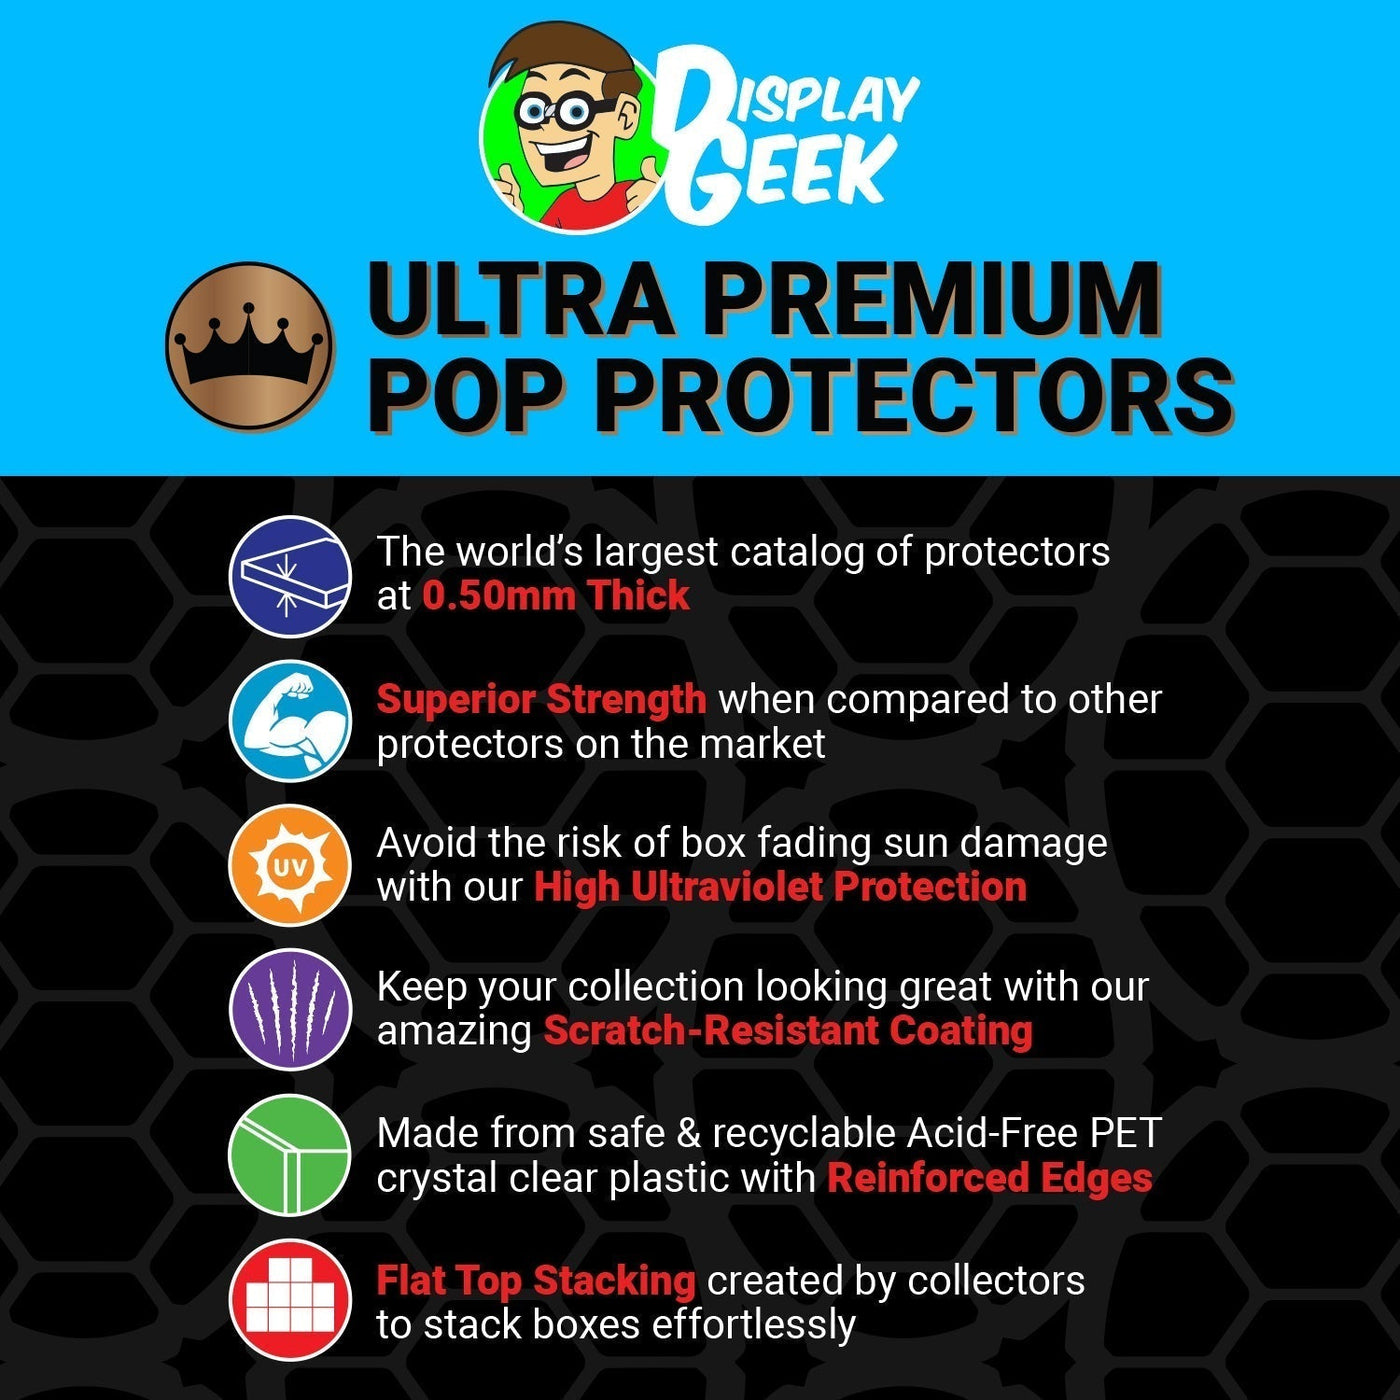 Pop Protector for 6 inch Giant Lady Light Orange #99 Super Funko Pop on The Protector Guide App by Display Geek